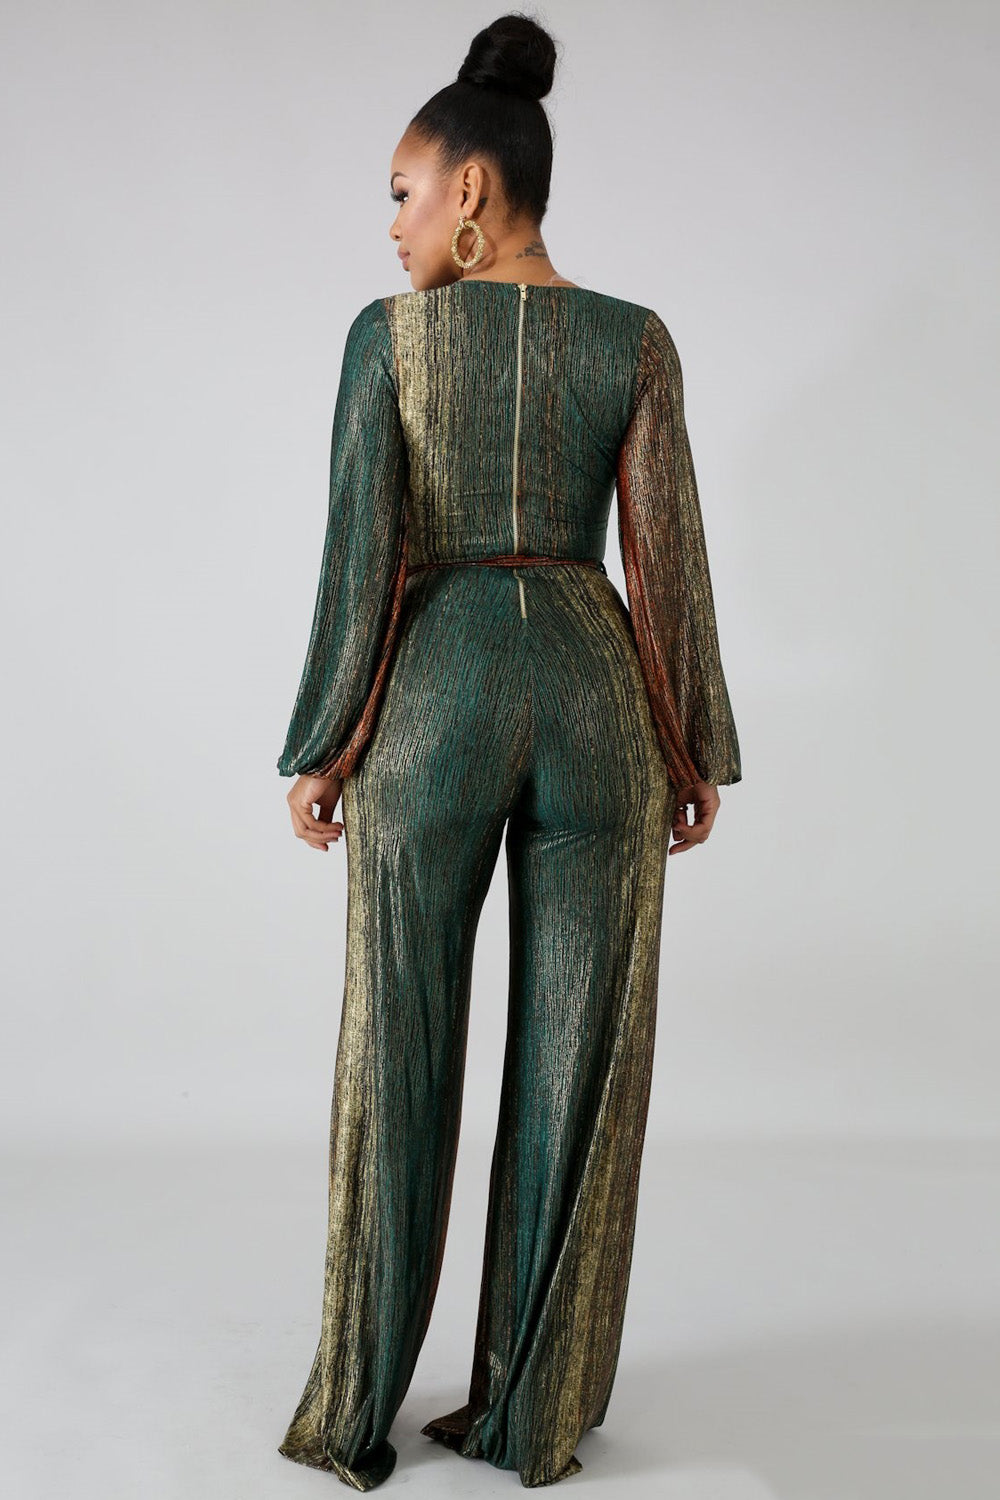 goPals long sleeve green stripe jumpsuit with cross-over front and wide leg pant. 